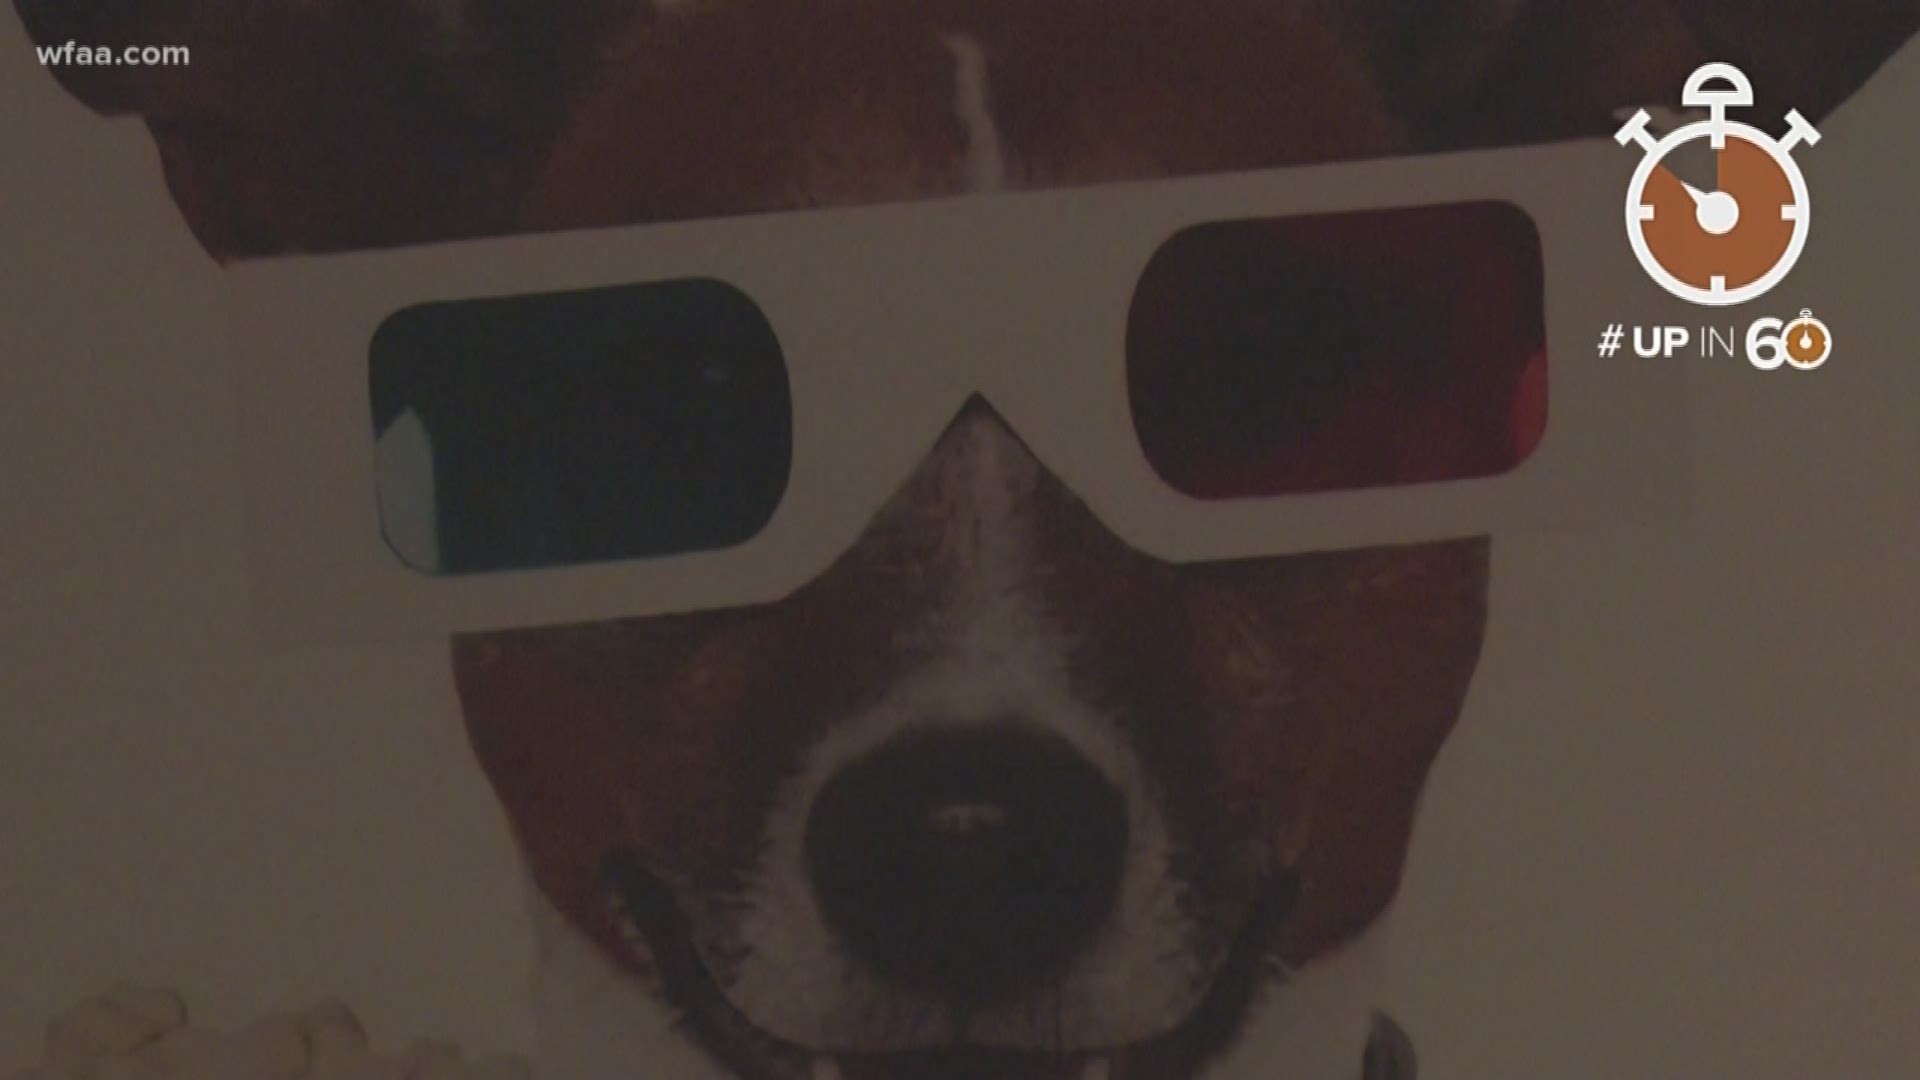 Take your dog to the movies? Why not! Plano theater is pup friendly